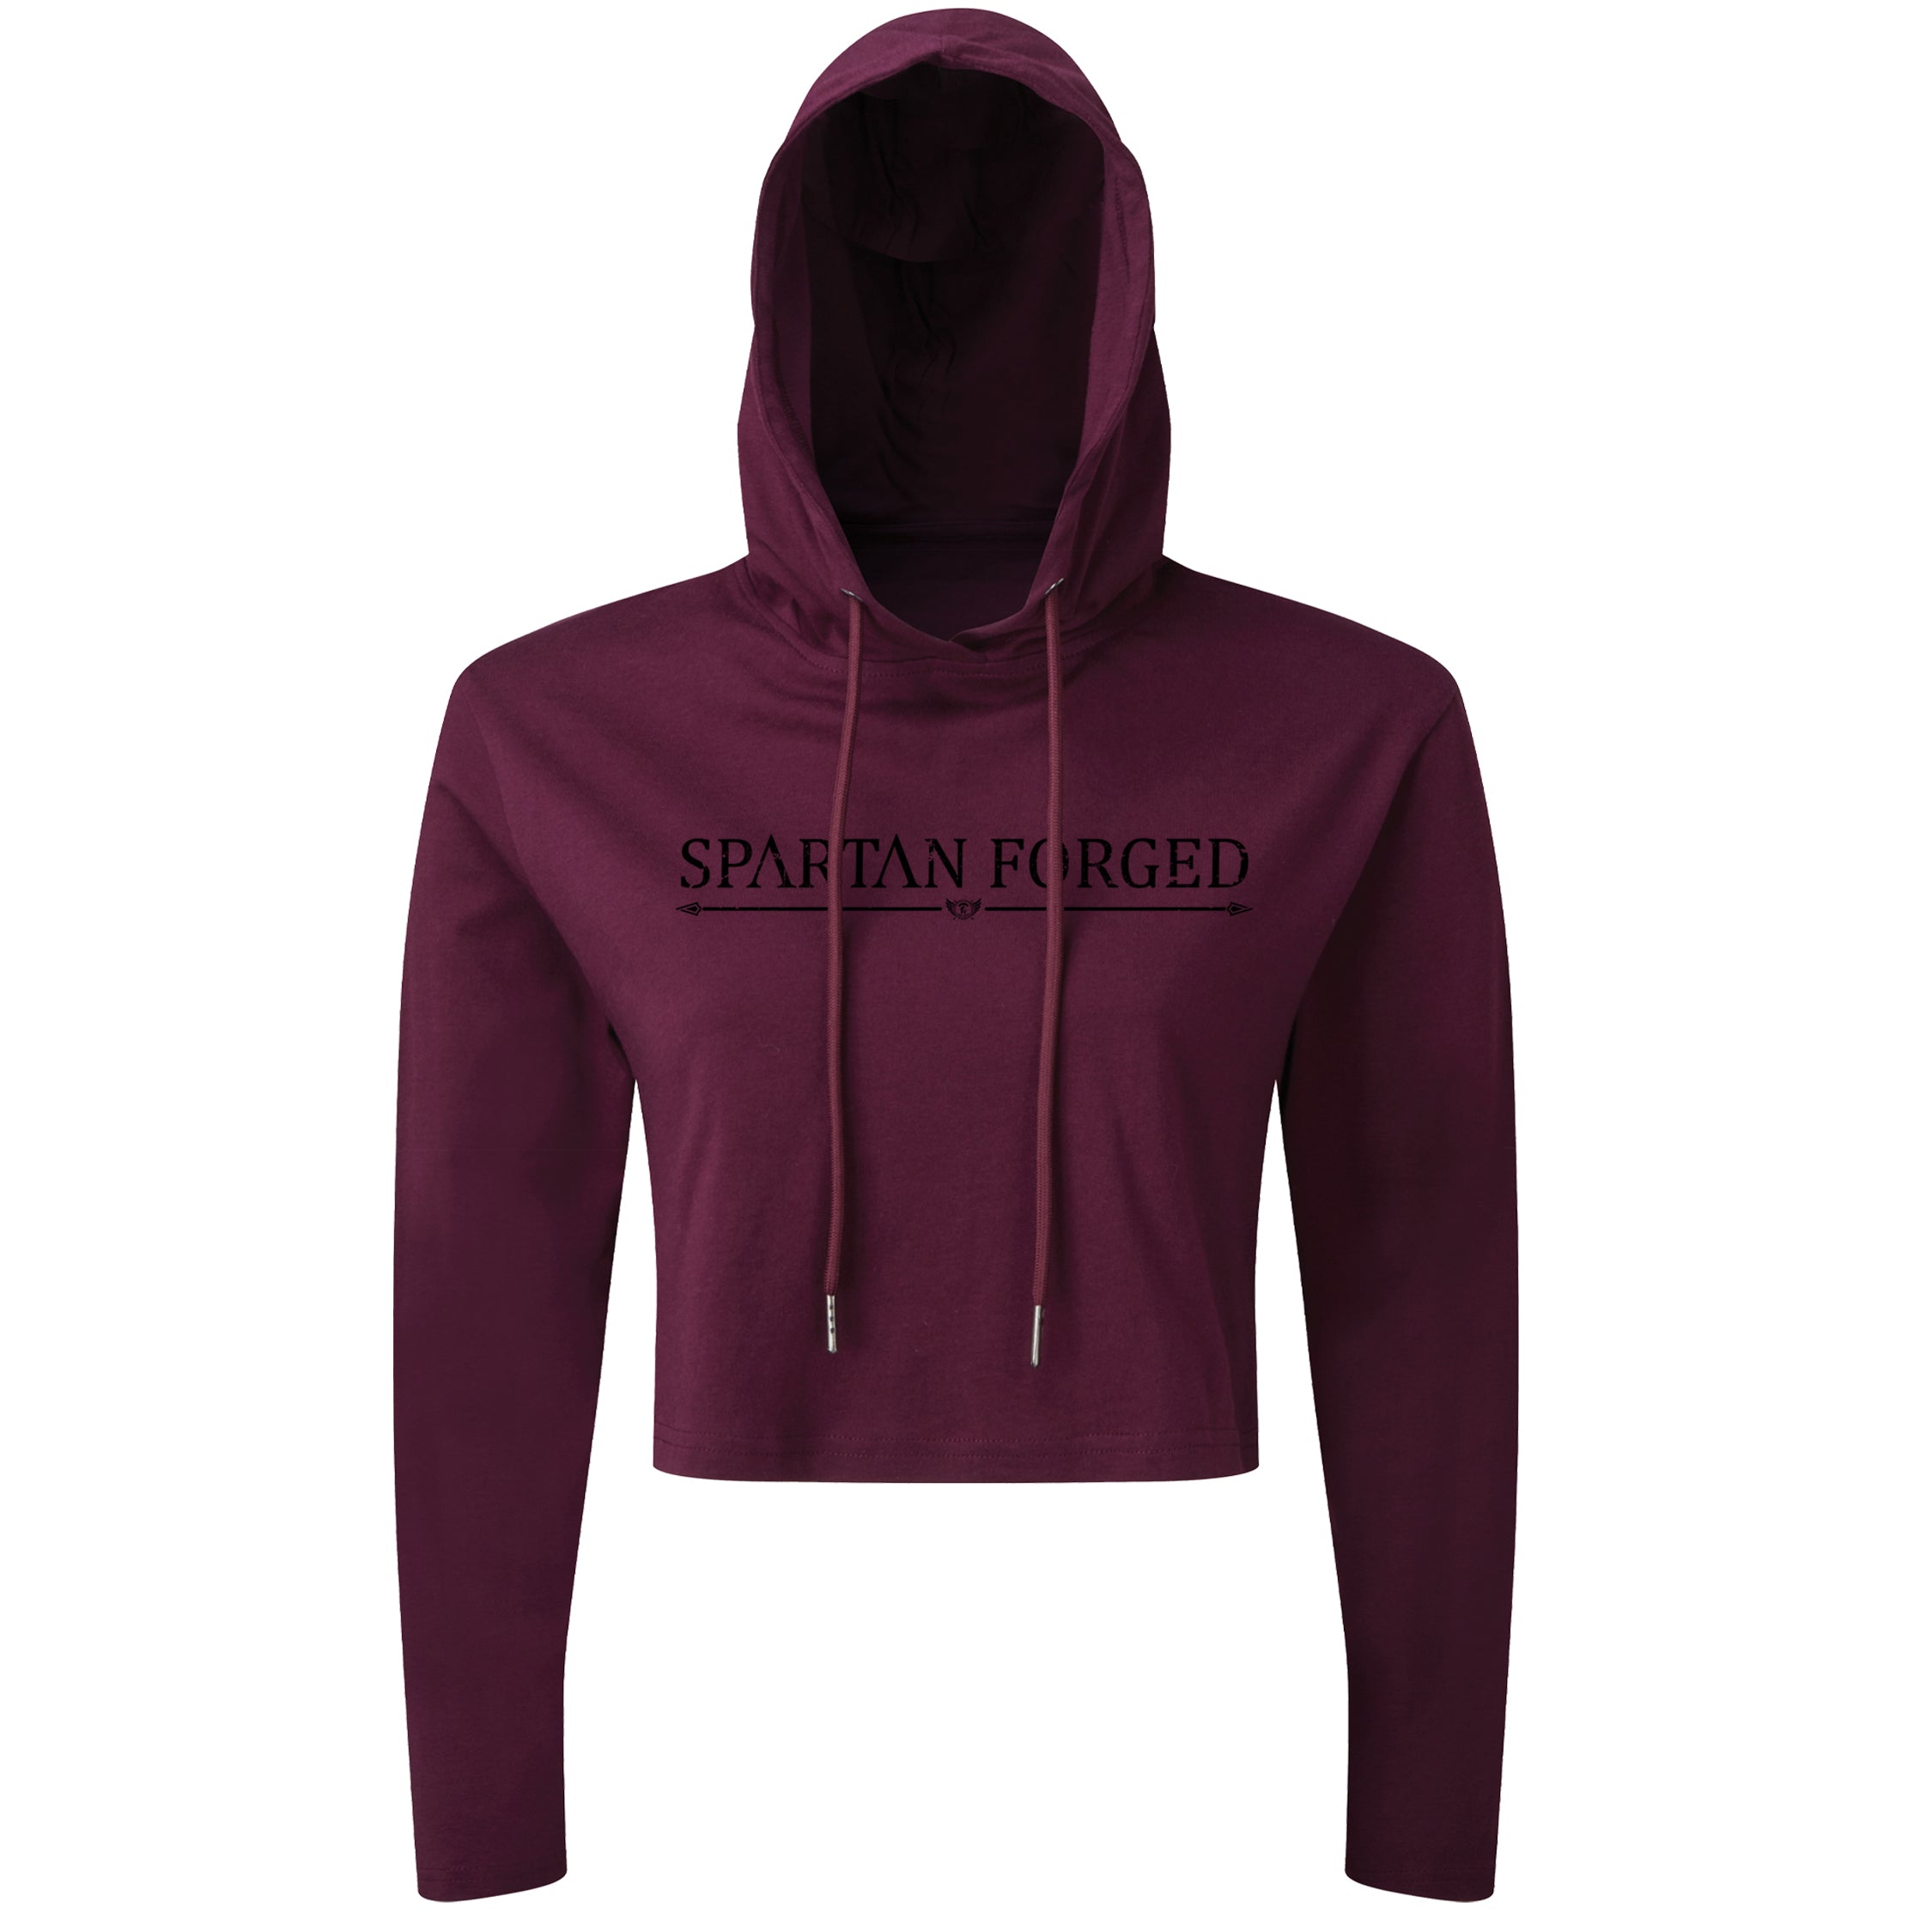 Spartan Forged - Spartan Forged - Cropped Hoodie